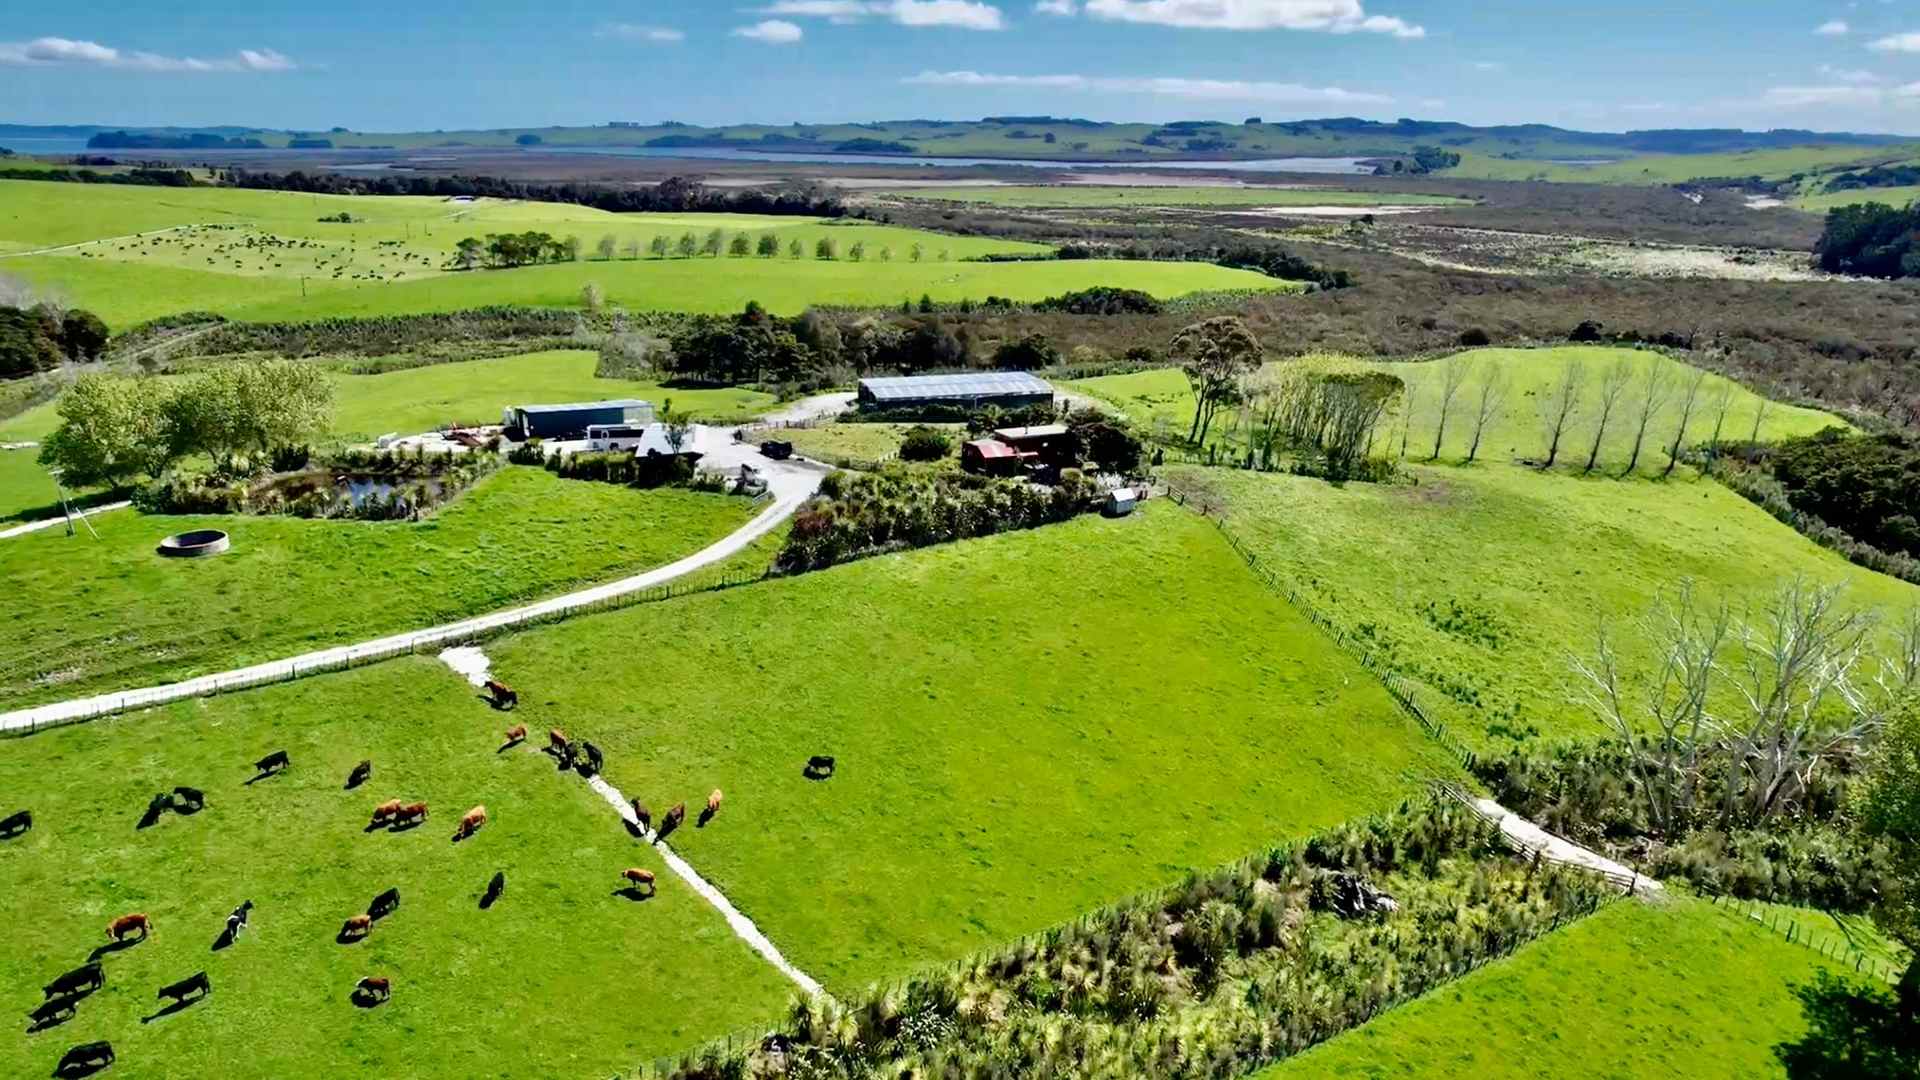 This 340-Acre Patch of Farmland North of Auckland Is Being Turned Into a Giant Festival Venue